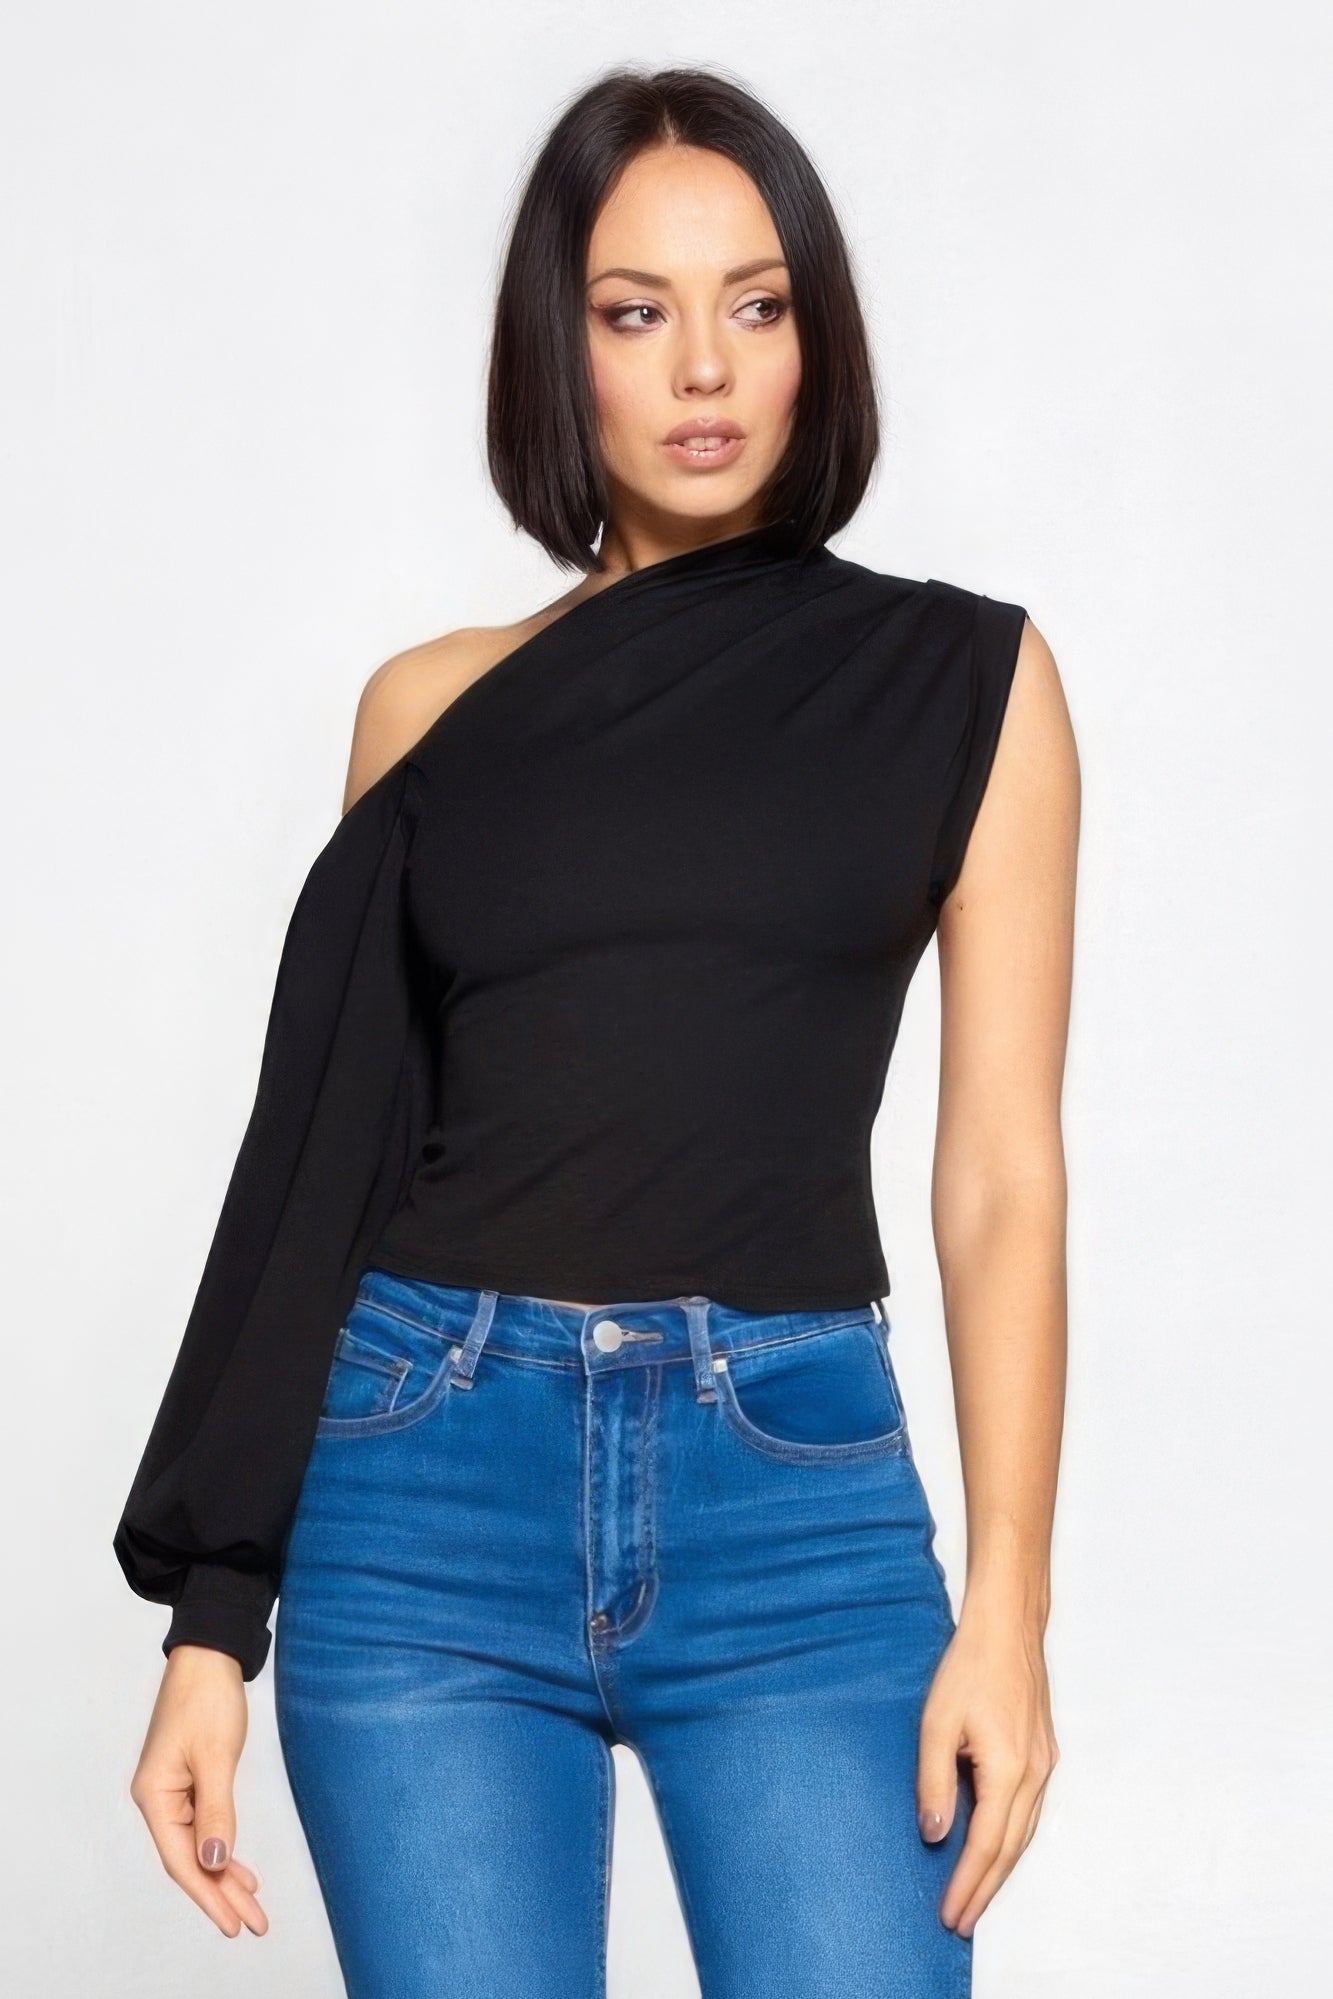 Ladies One-shoulder Top | APPAREL, Black, CCPRODUCTS, MADE IN USA, NEW ARRIVALS, Off White, TOPS | Bodiied